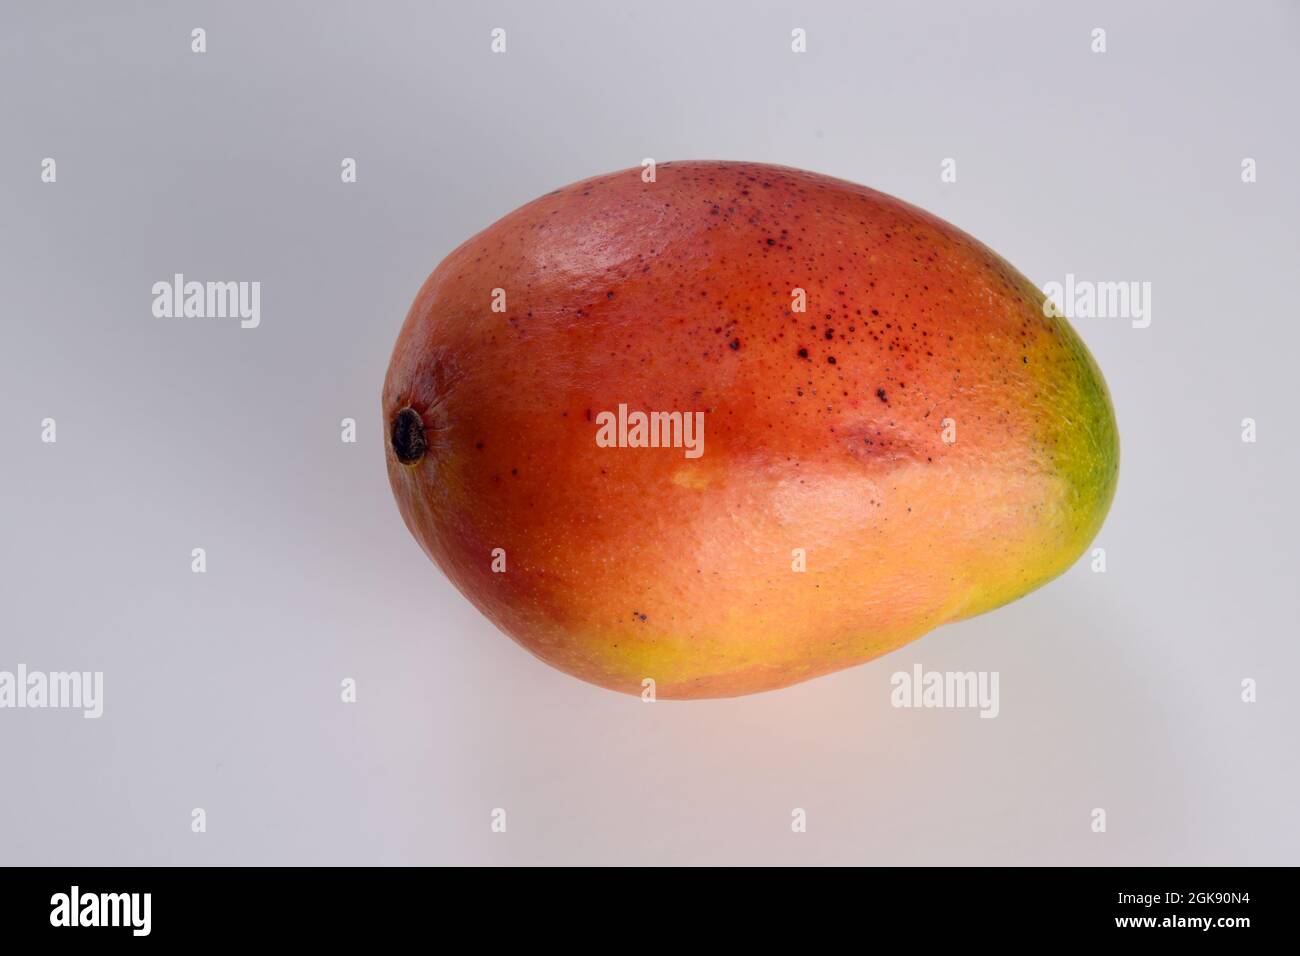 a ripe mango with a mixture of red and orange tones Stock Photo